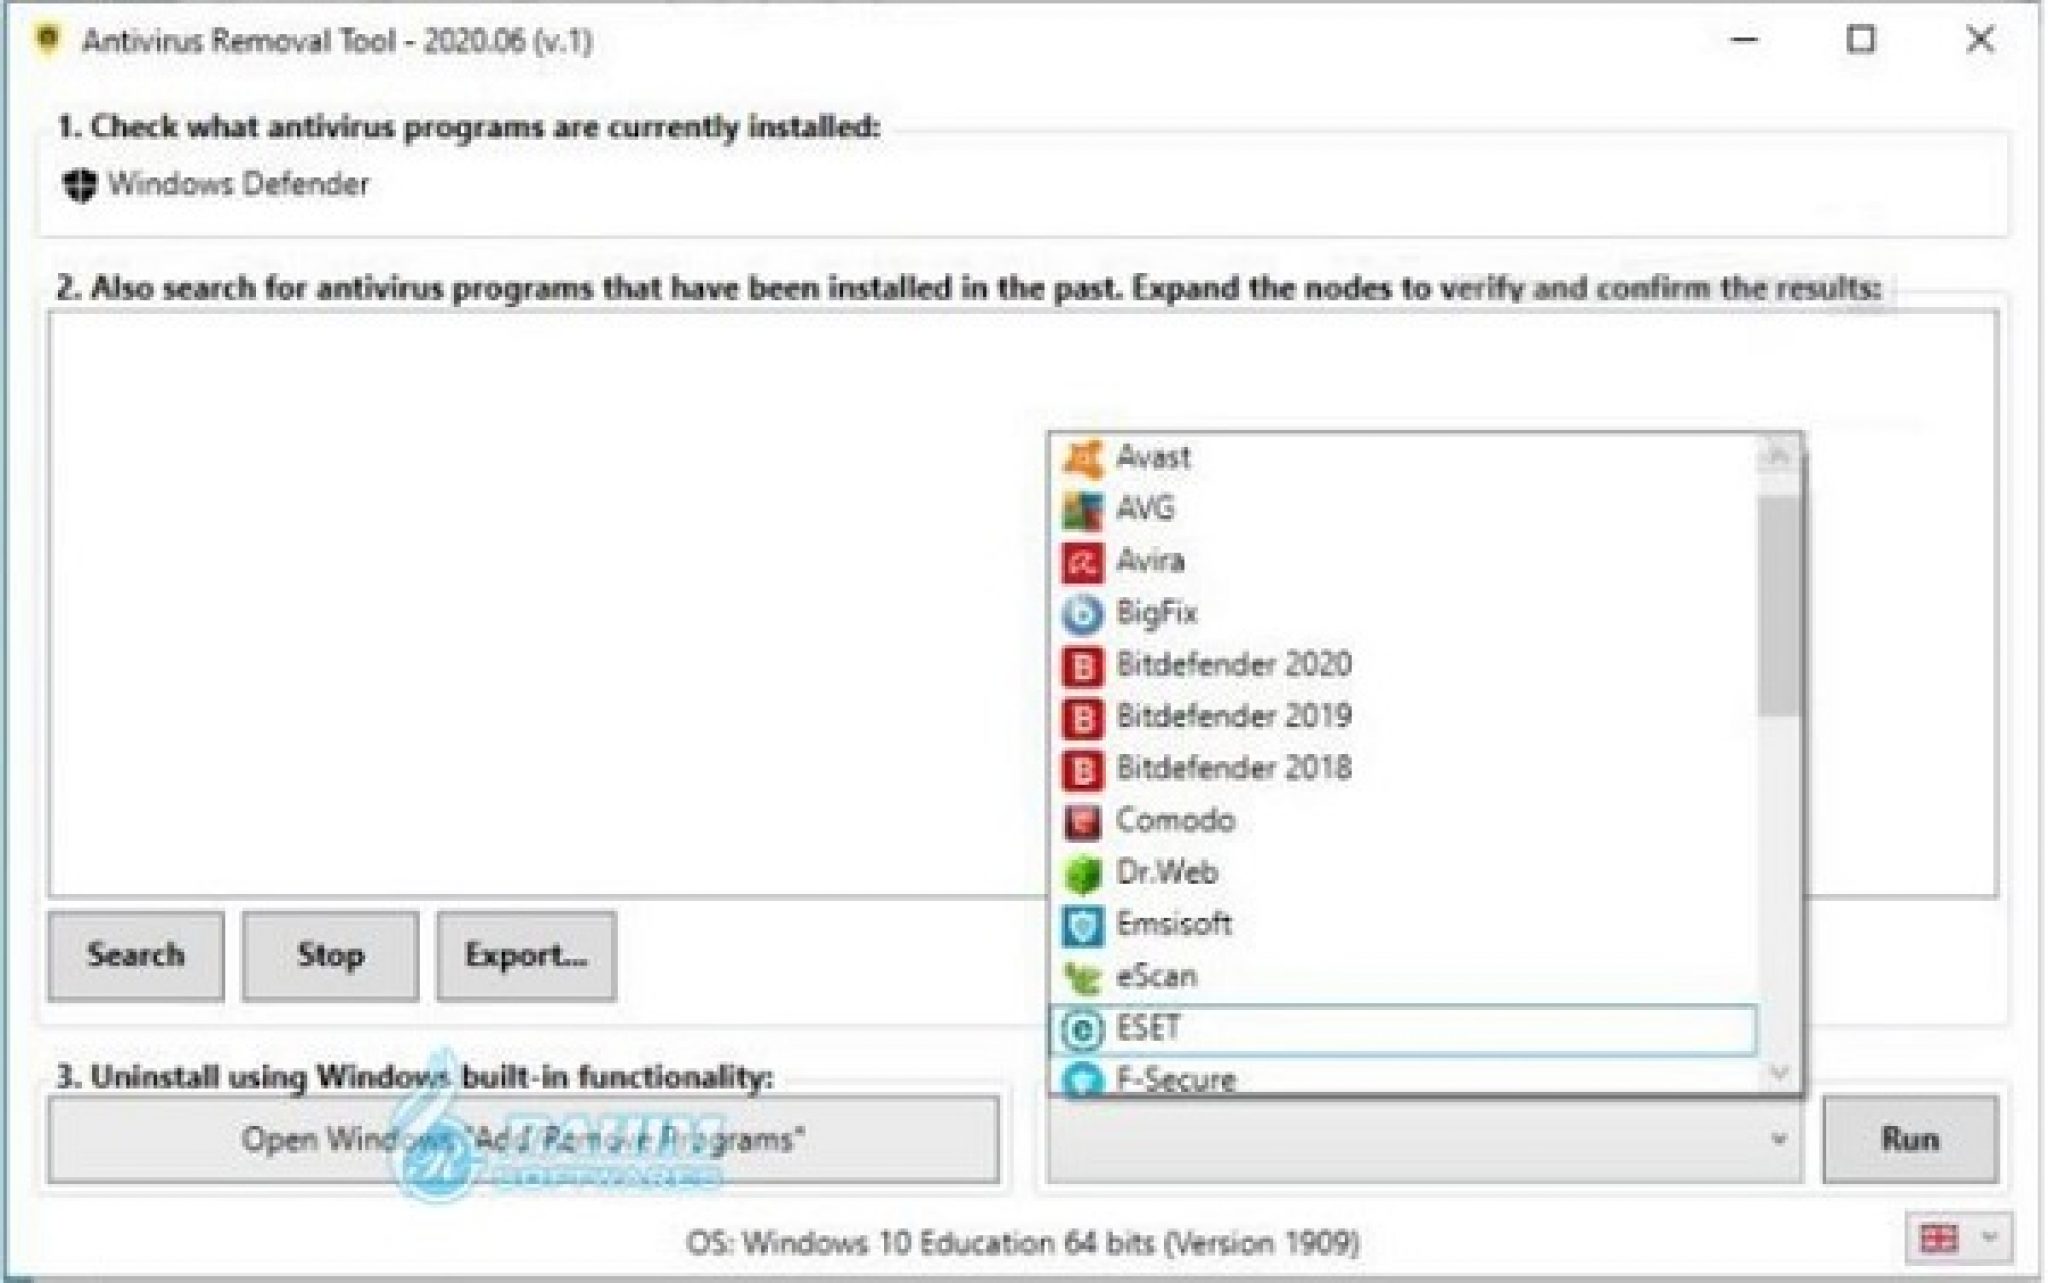 instal the new for windows Antivirus Removal Tool 2023.10 (v.1)